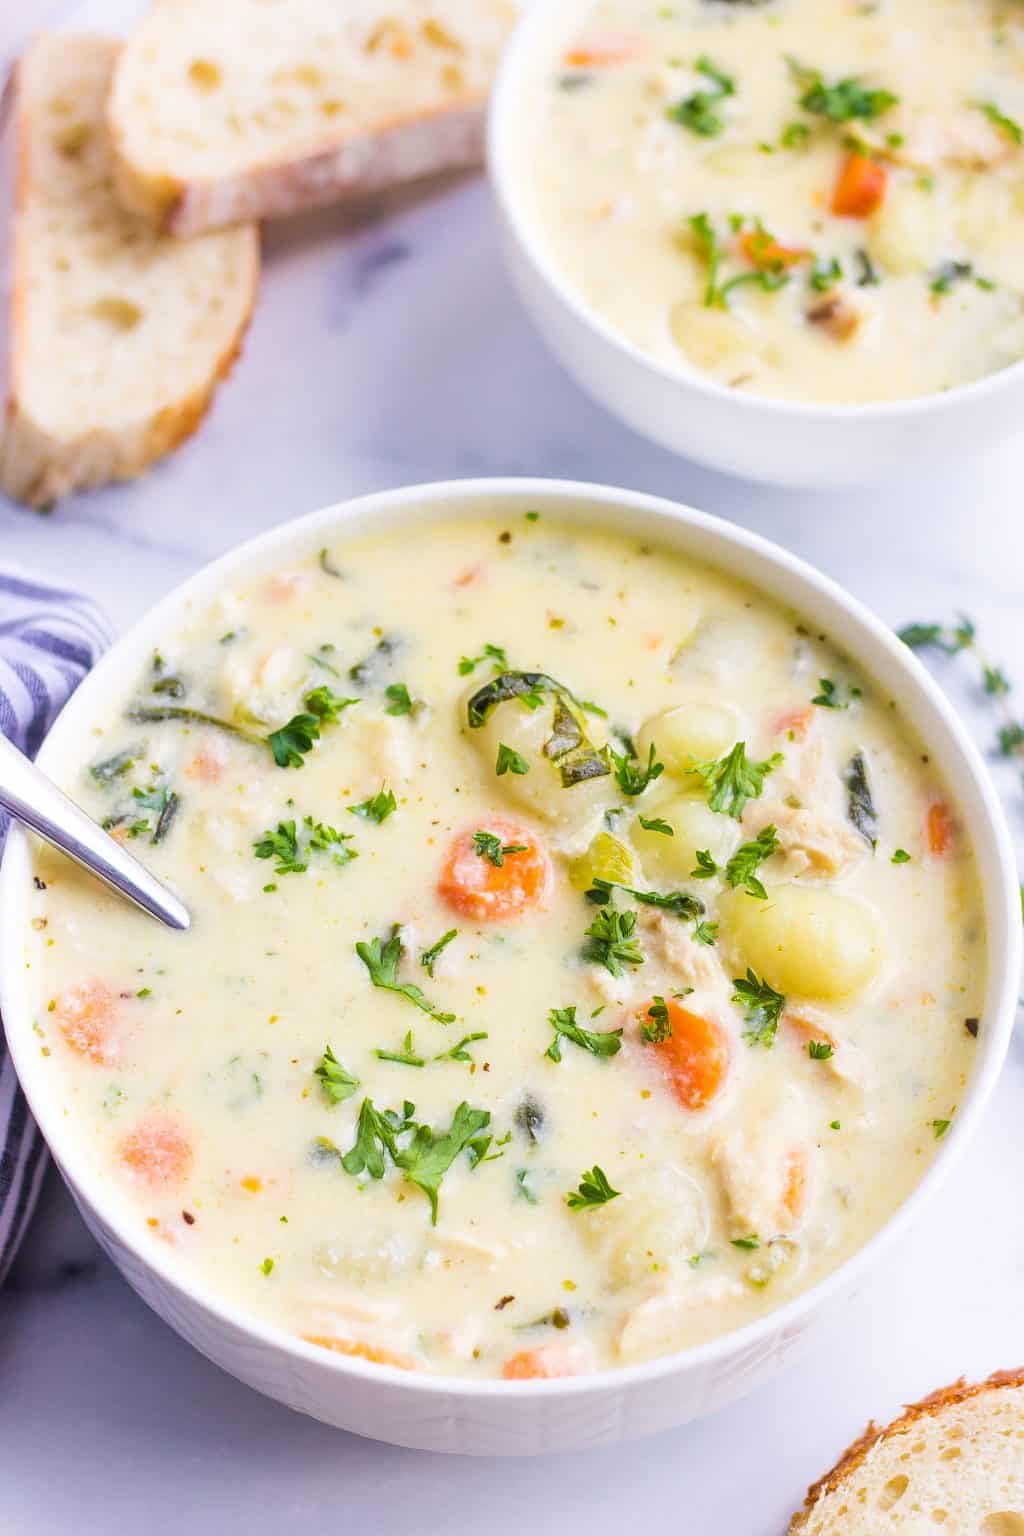 Bowl of creamy soup with gnocchi, chicken, carrots and parsley.